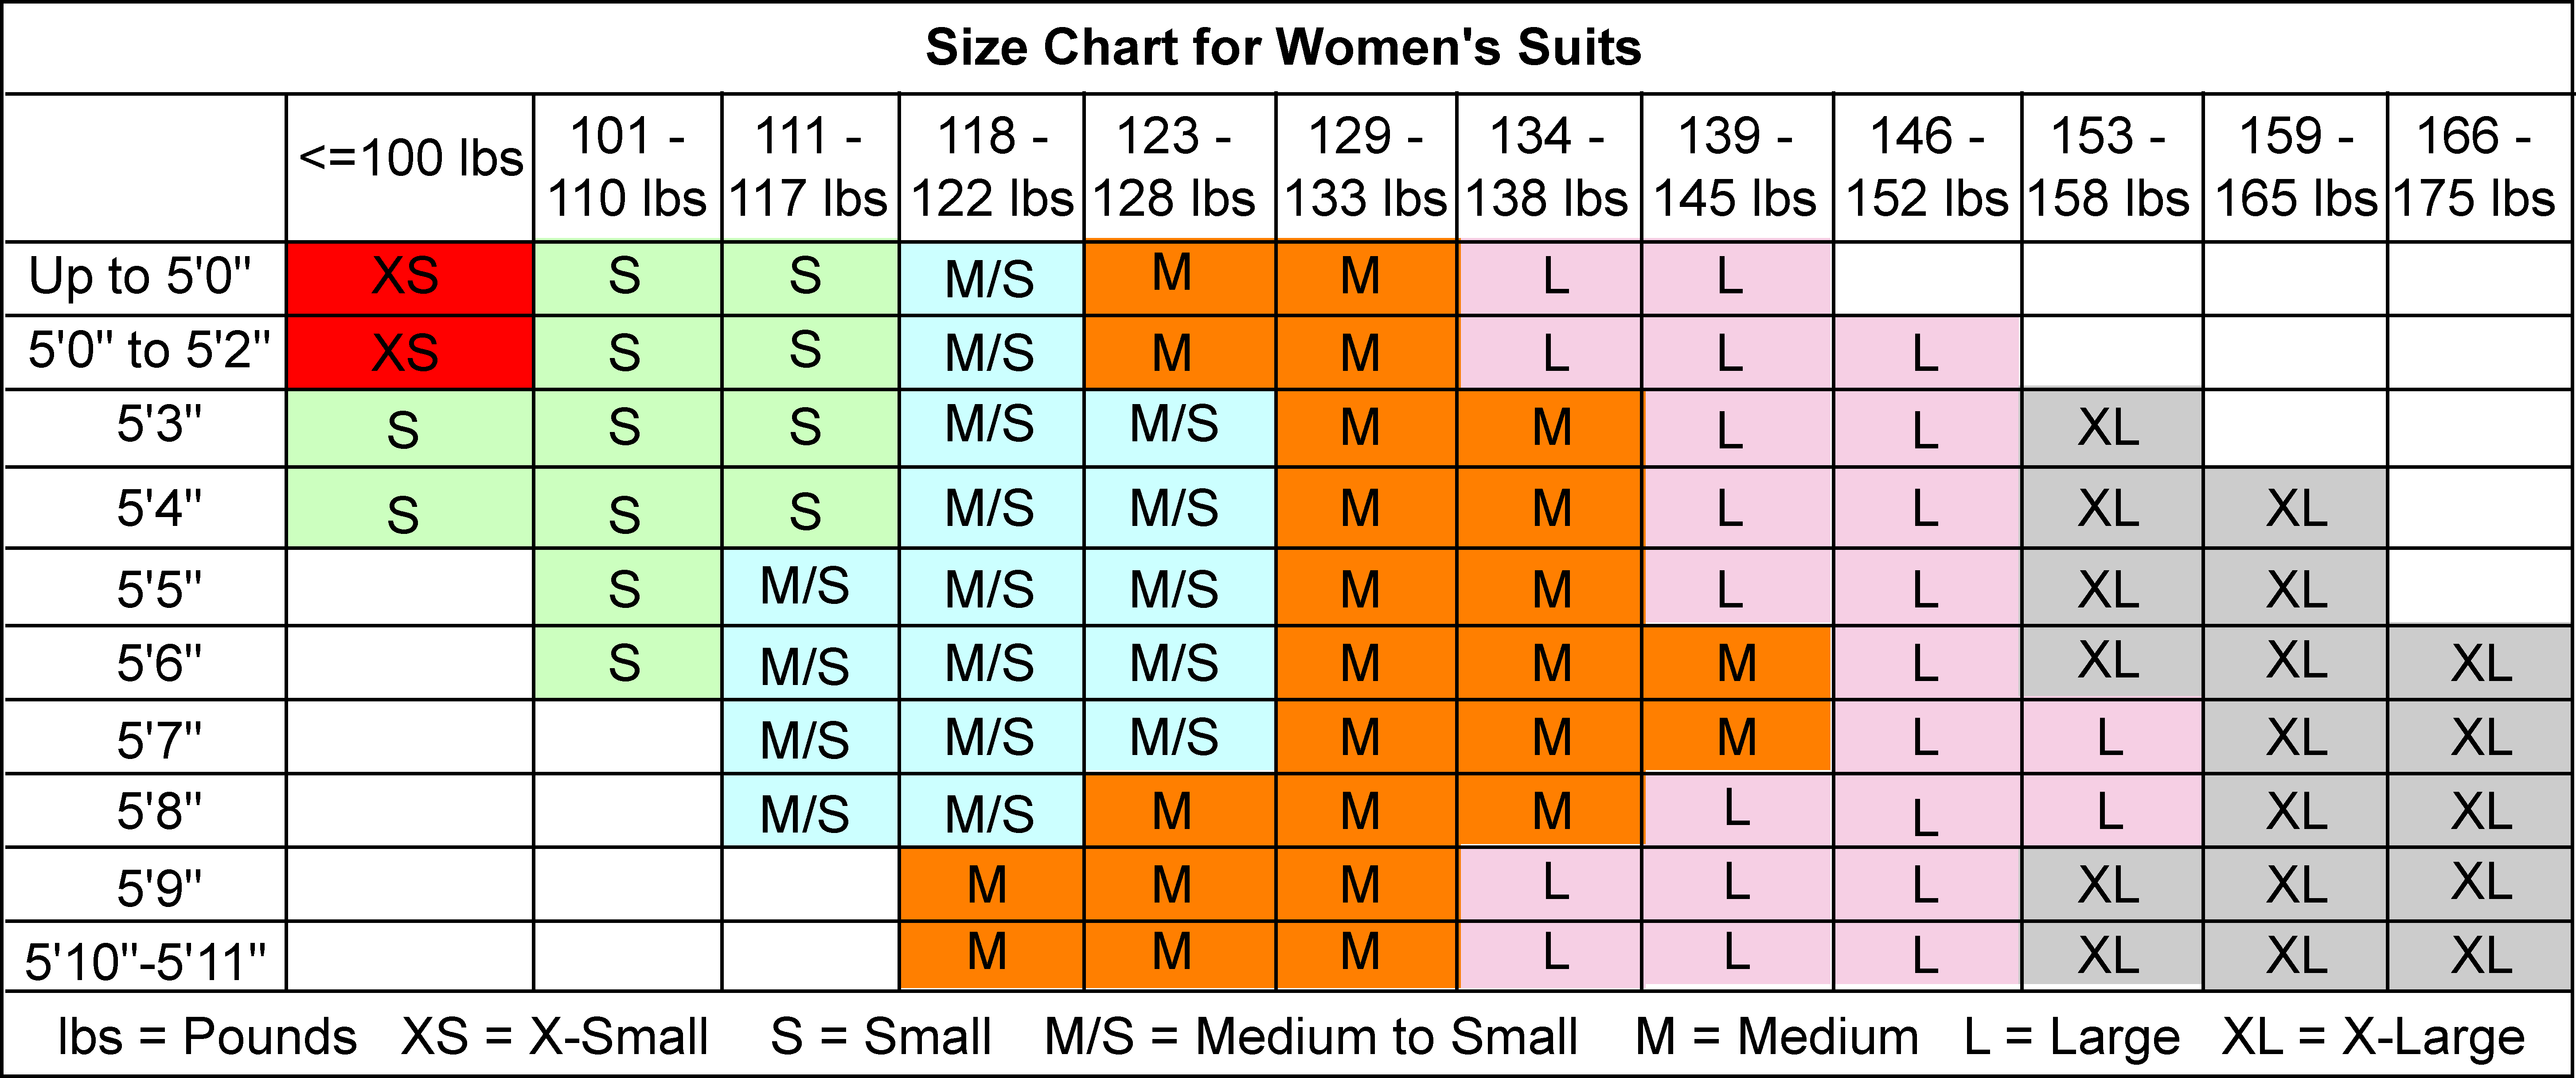 Women's size chart for clothes.